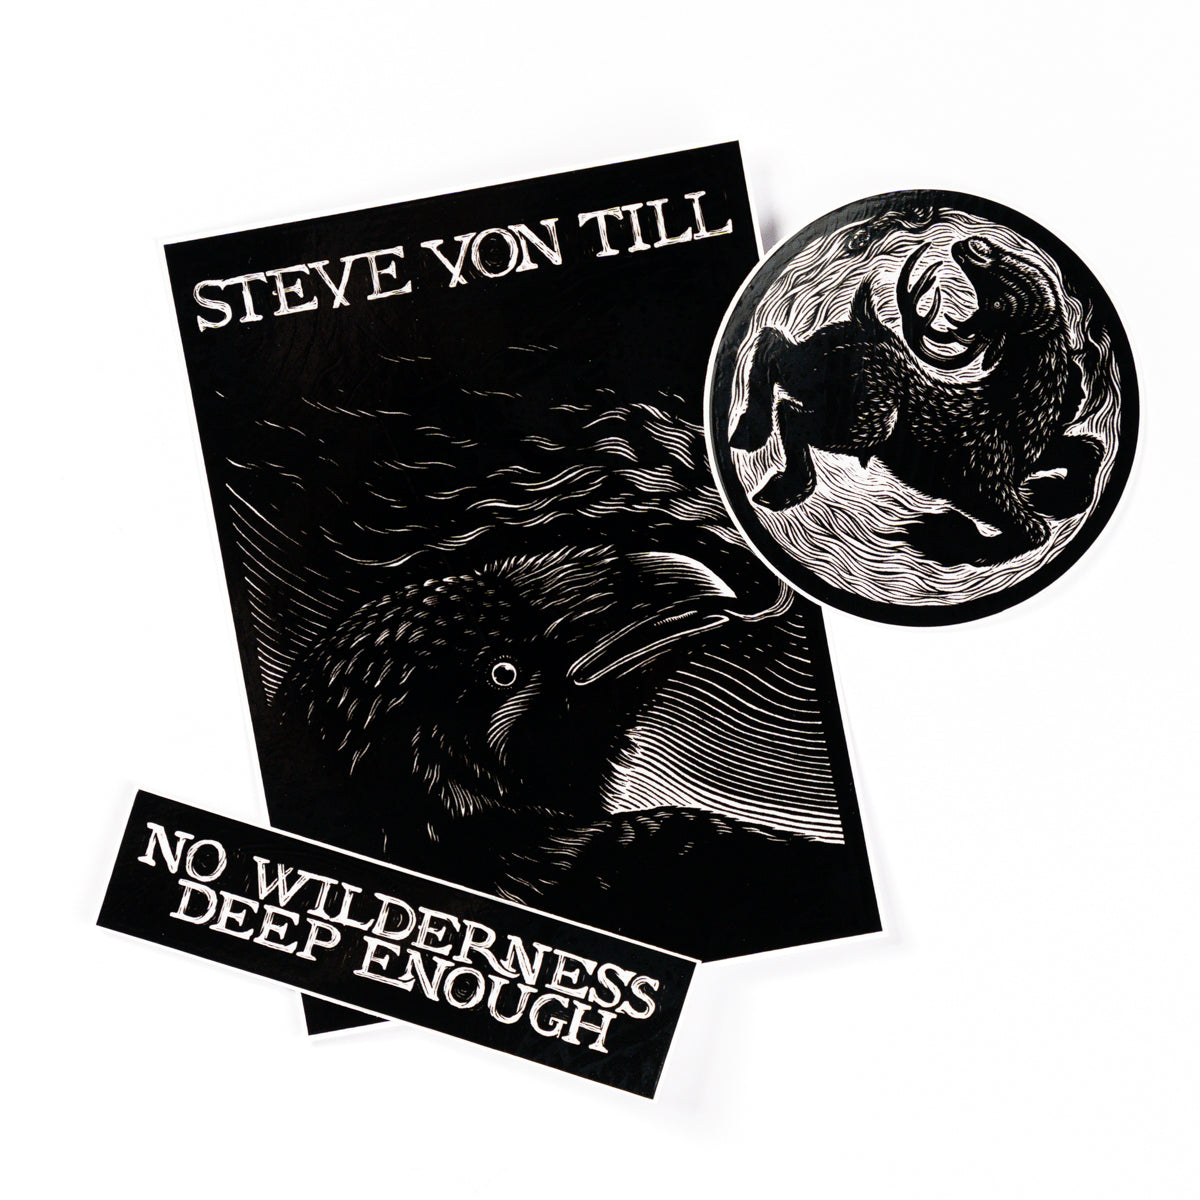 STEVE VON TILL "Bull / NWDE / Crow" Stickers Pack